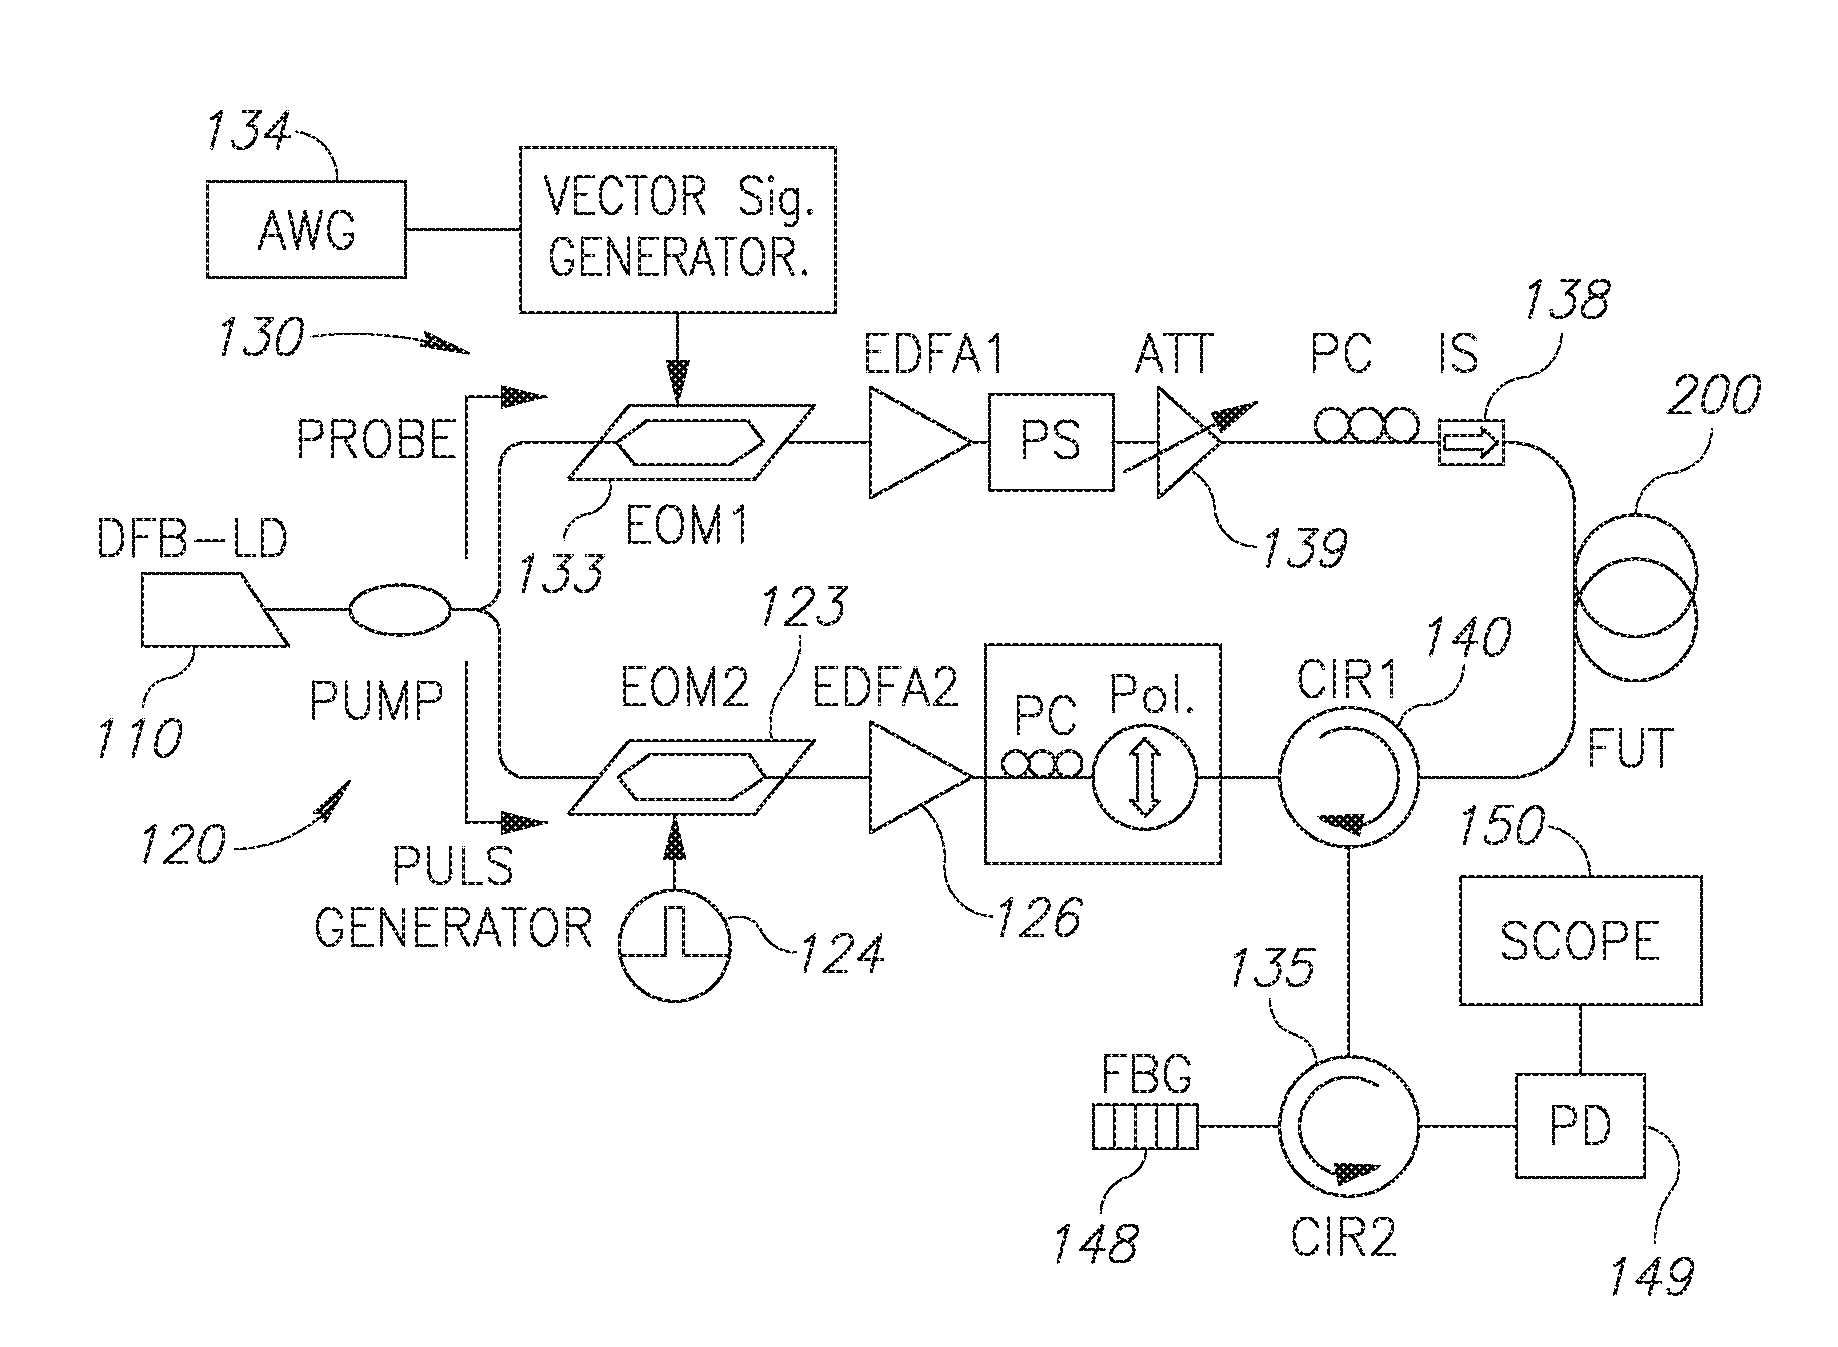 Pump-power-independent double slope-assisted distributed and fast brillouin fiber-optic sensor